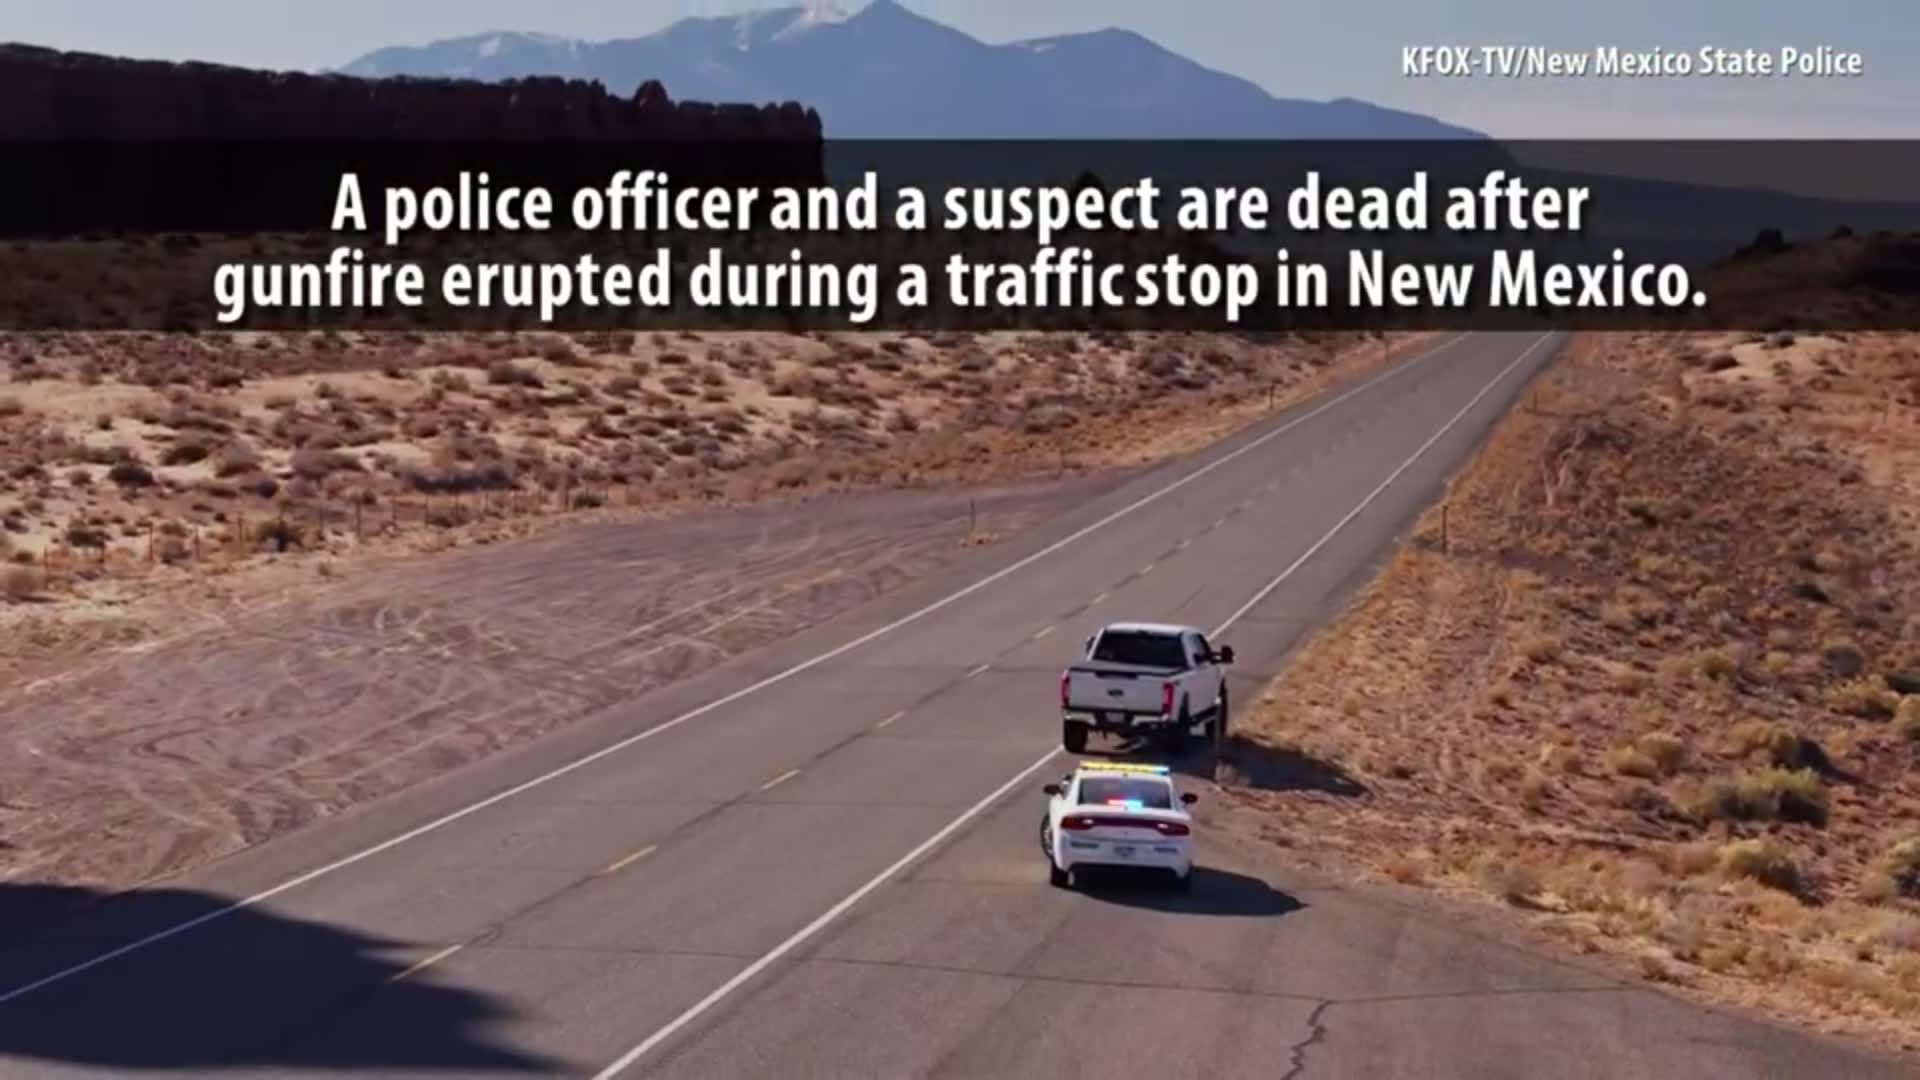 New Mexico State Police officer shot, killed during traffic stop; suspect also dead Trending fox23